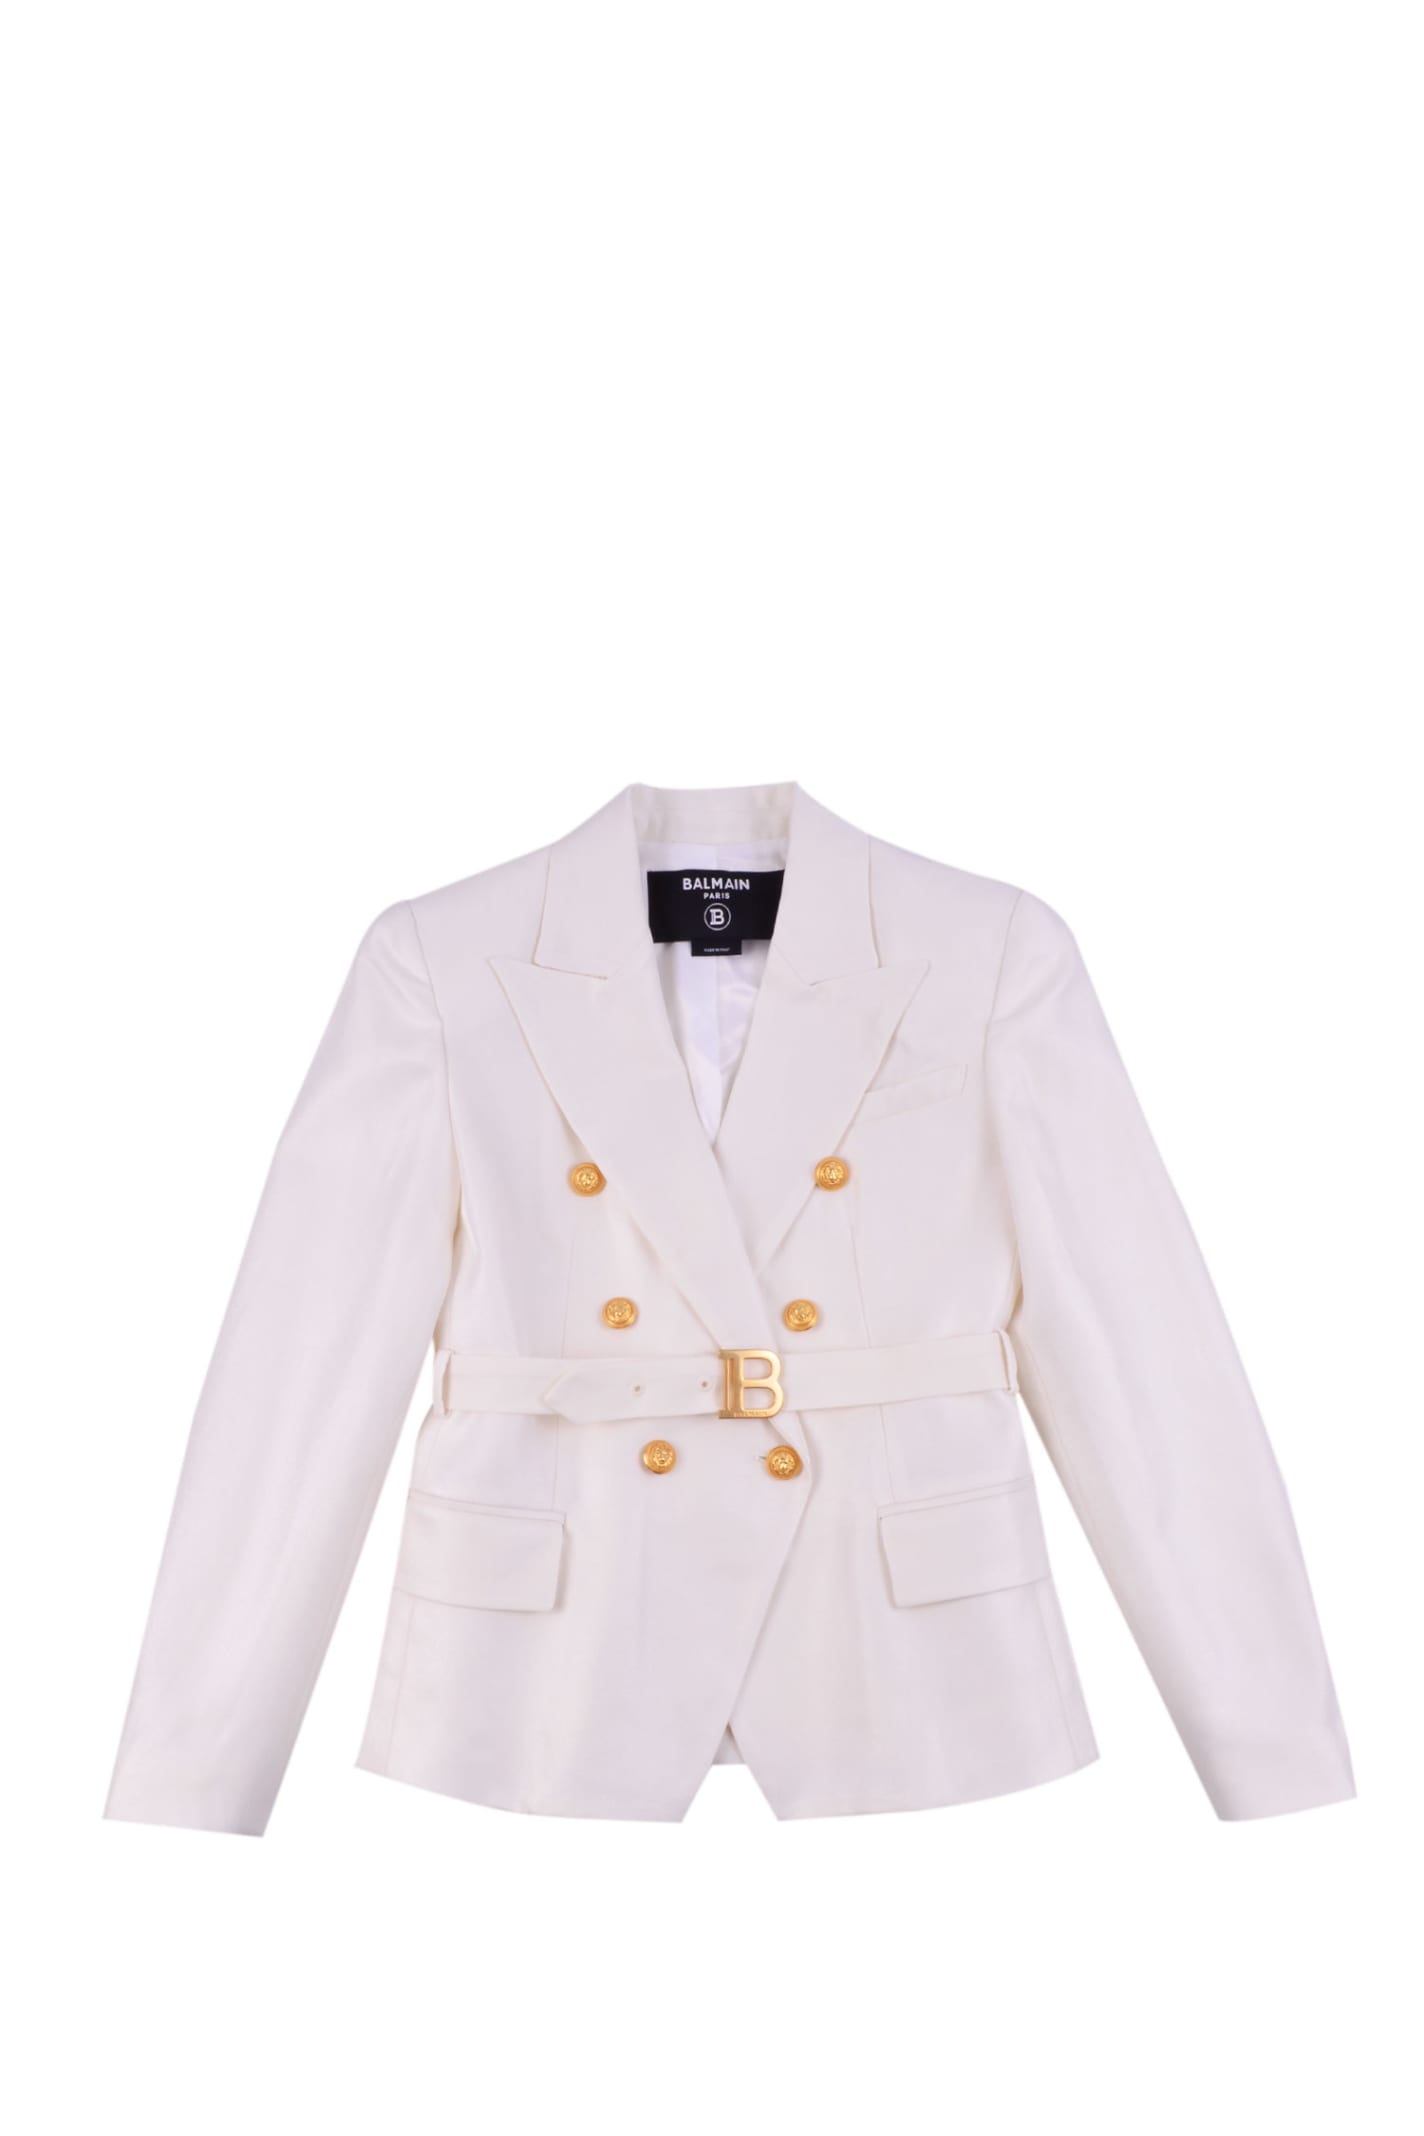 BALMAIN DOUBLE-BREASTED BLAZER WITH LOGOED BELT